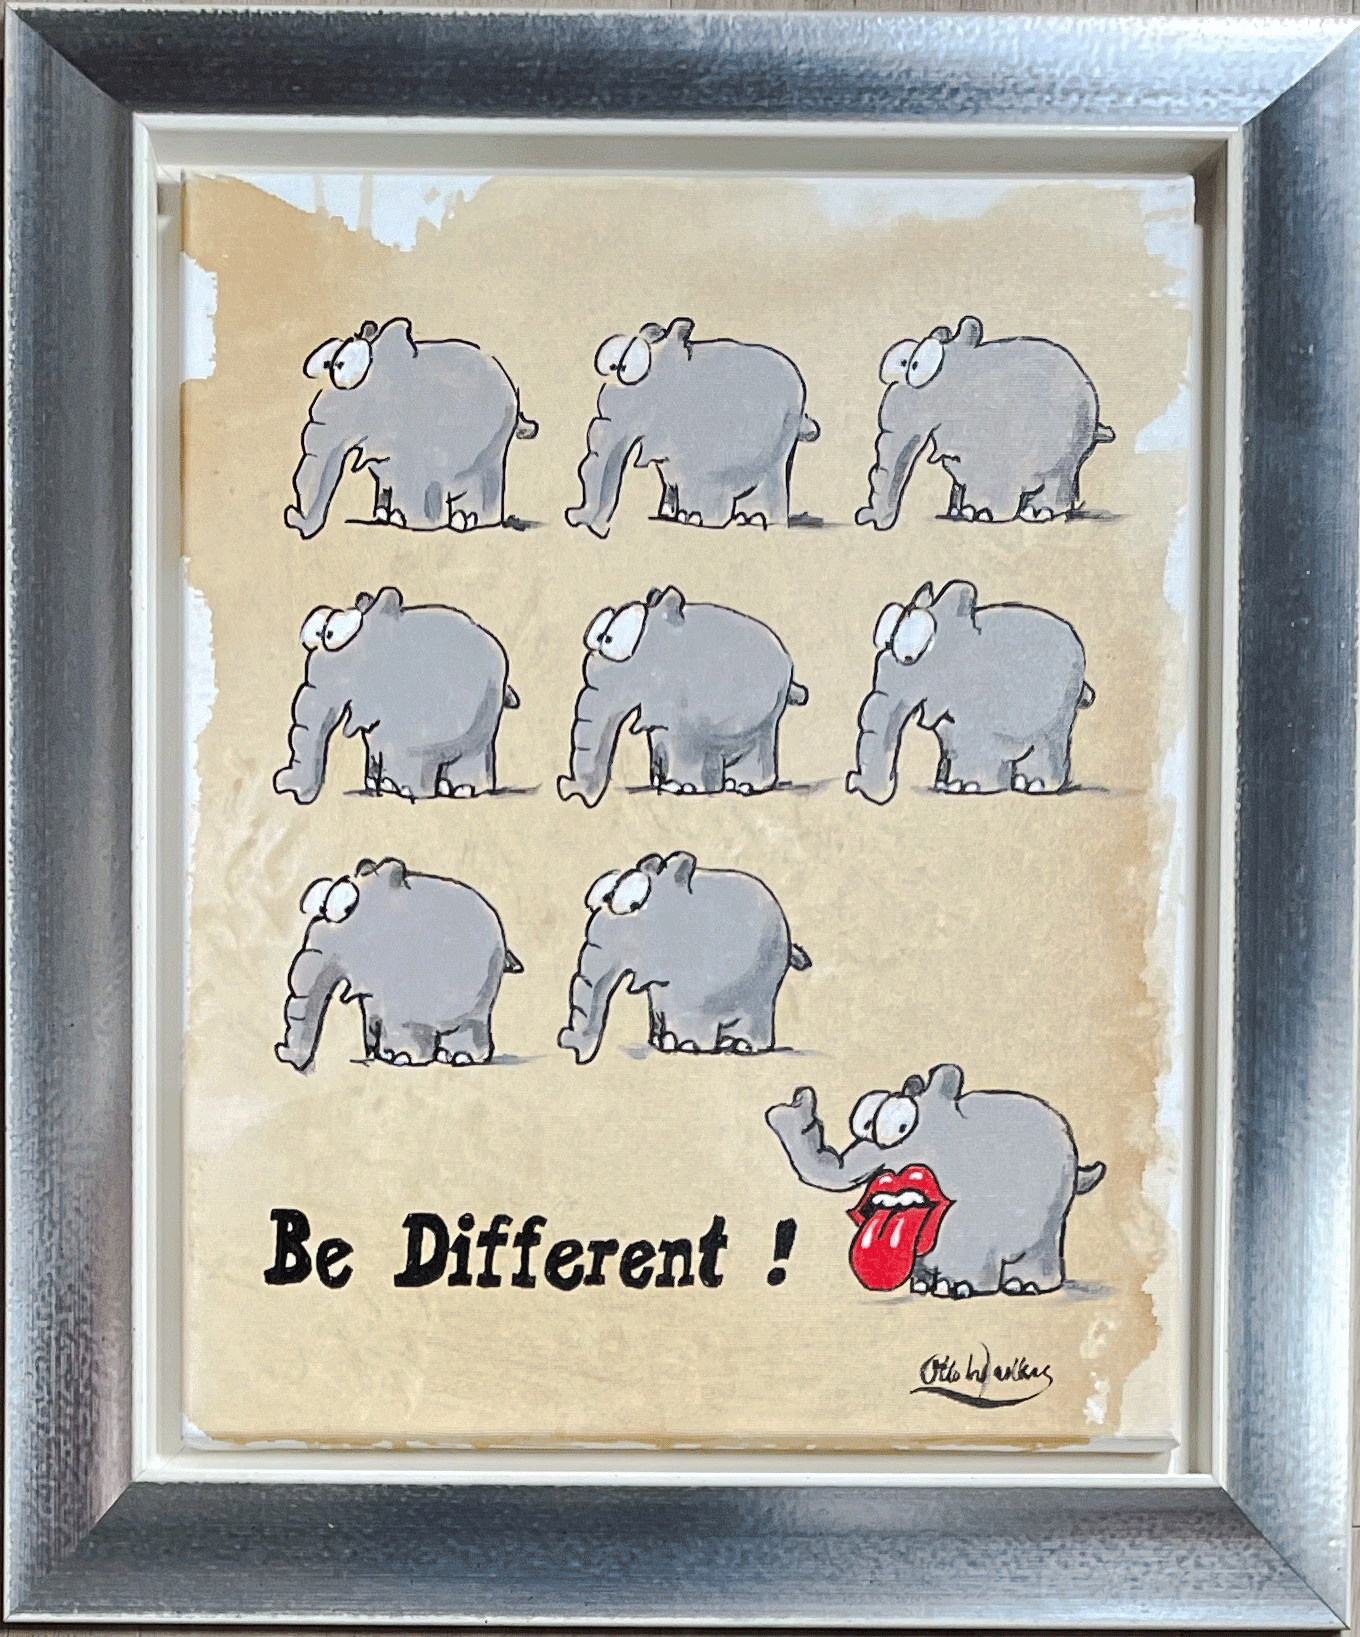 Otto Waalkes "Be Different - Rolling Stones"